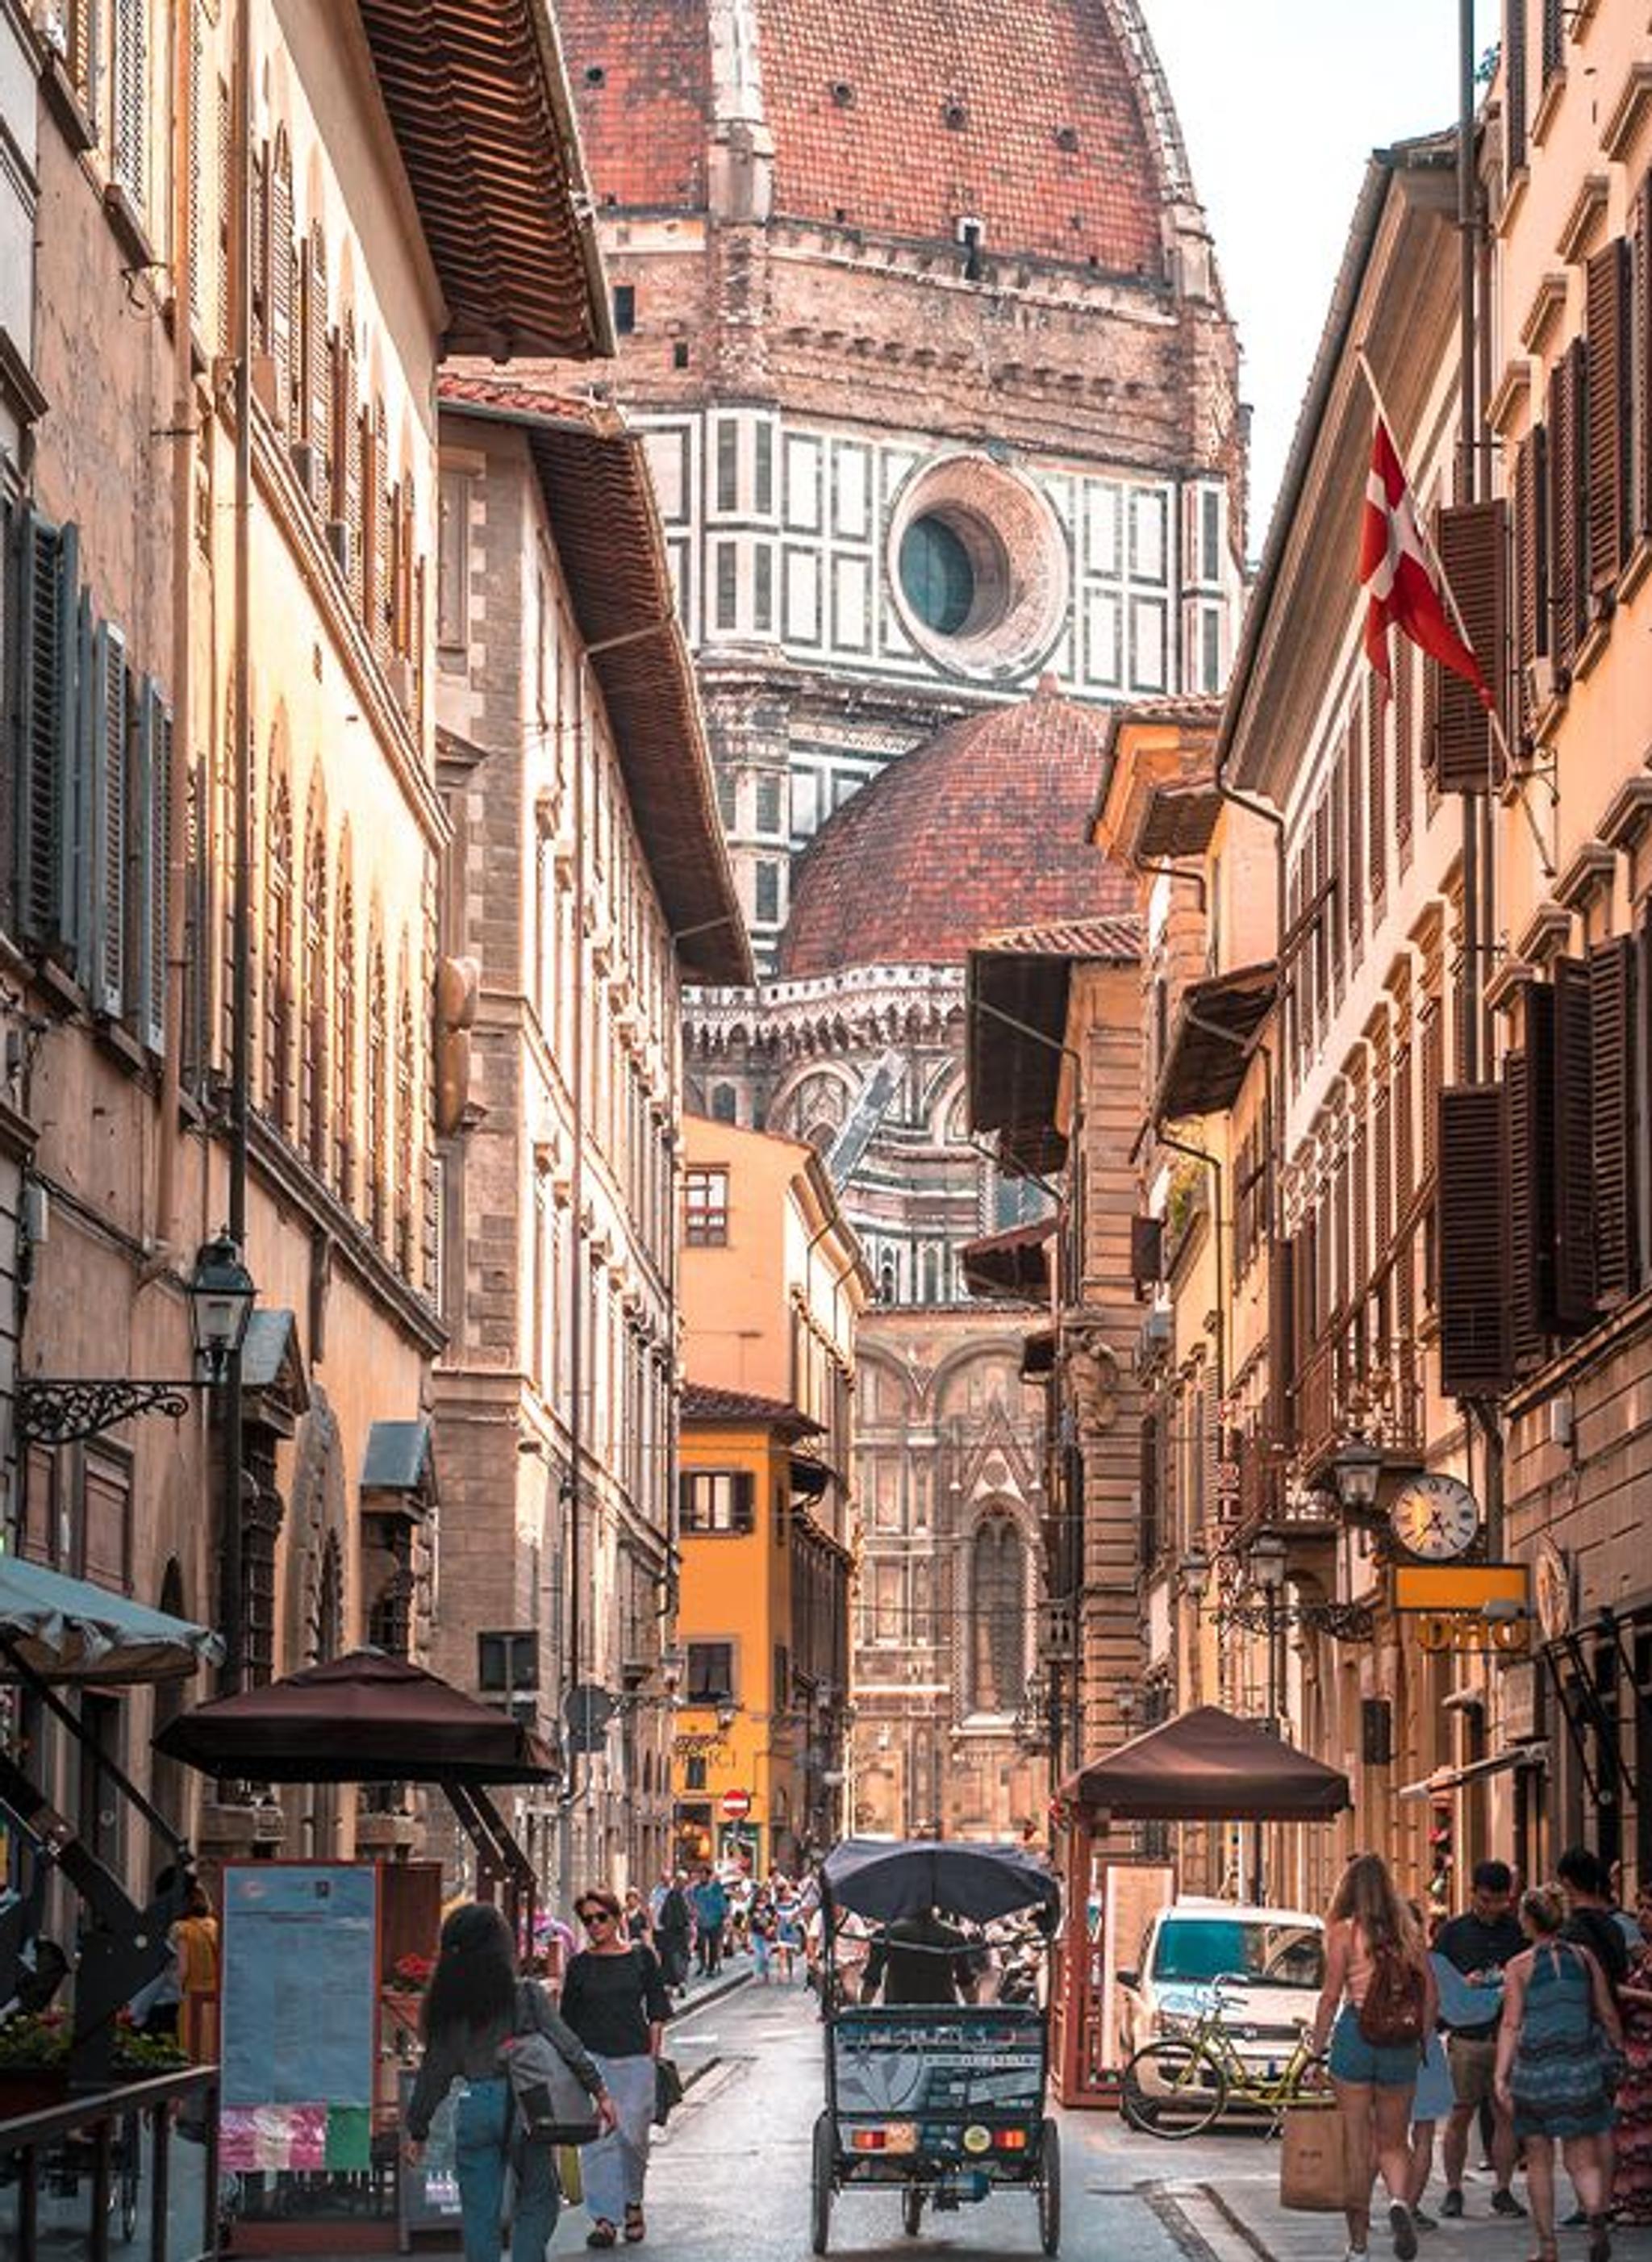 The streets of Firenze